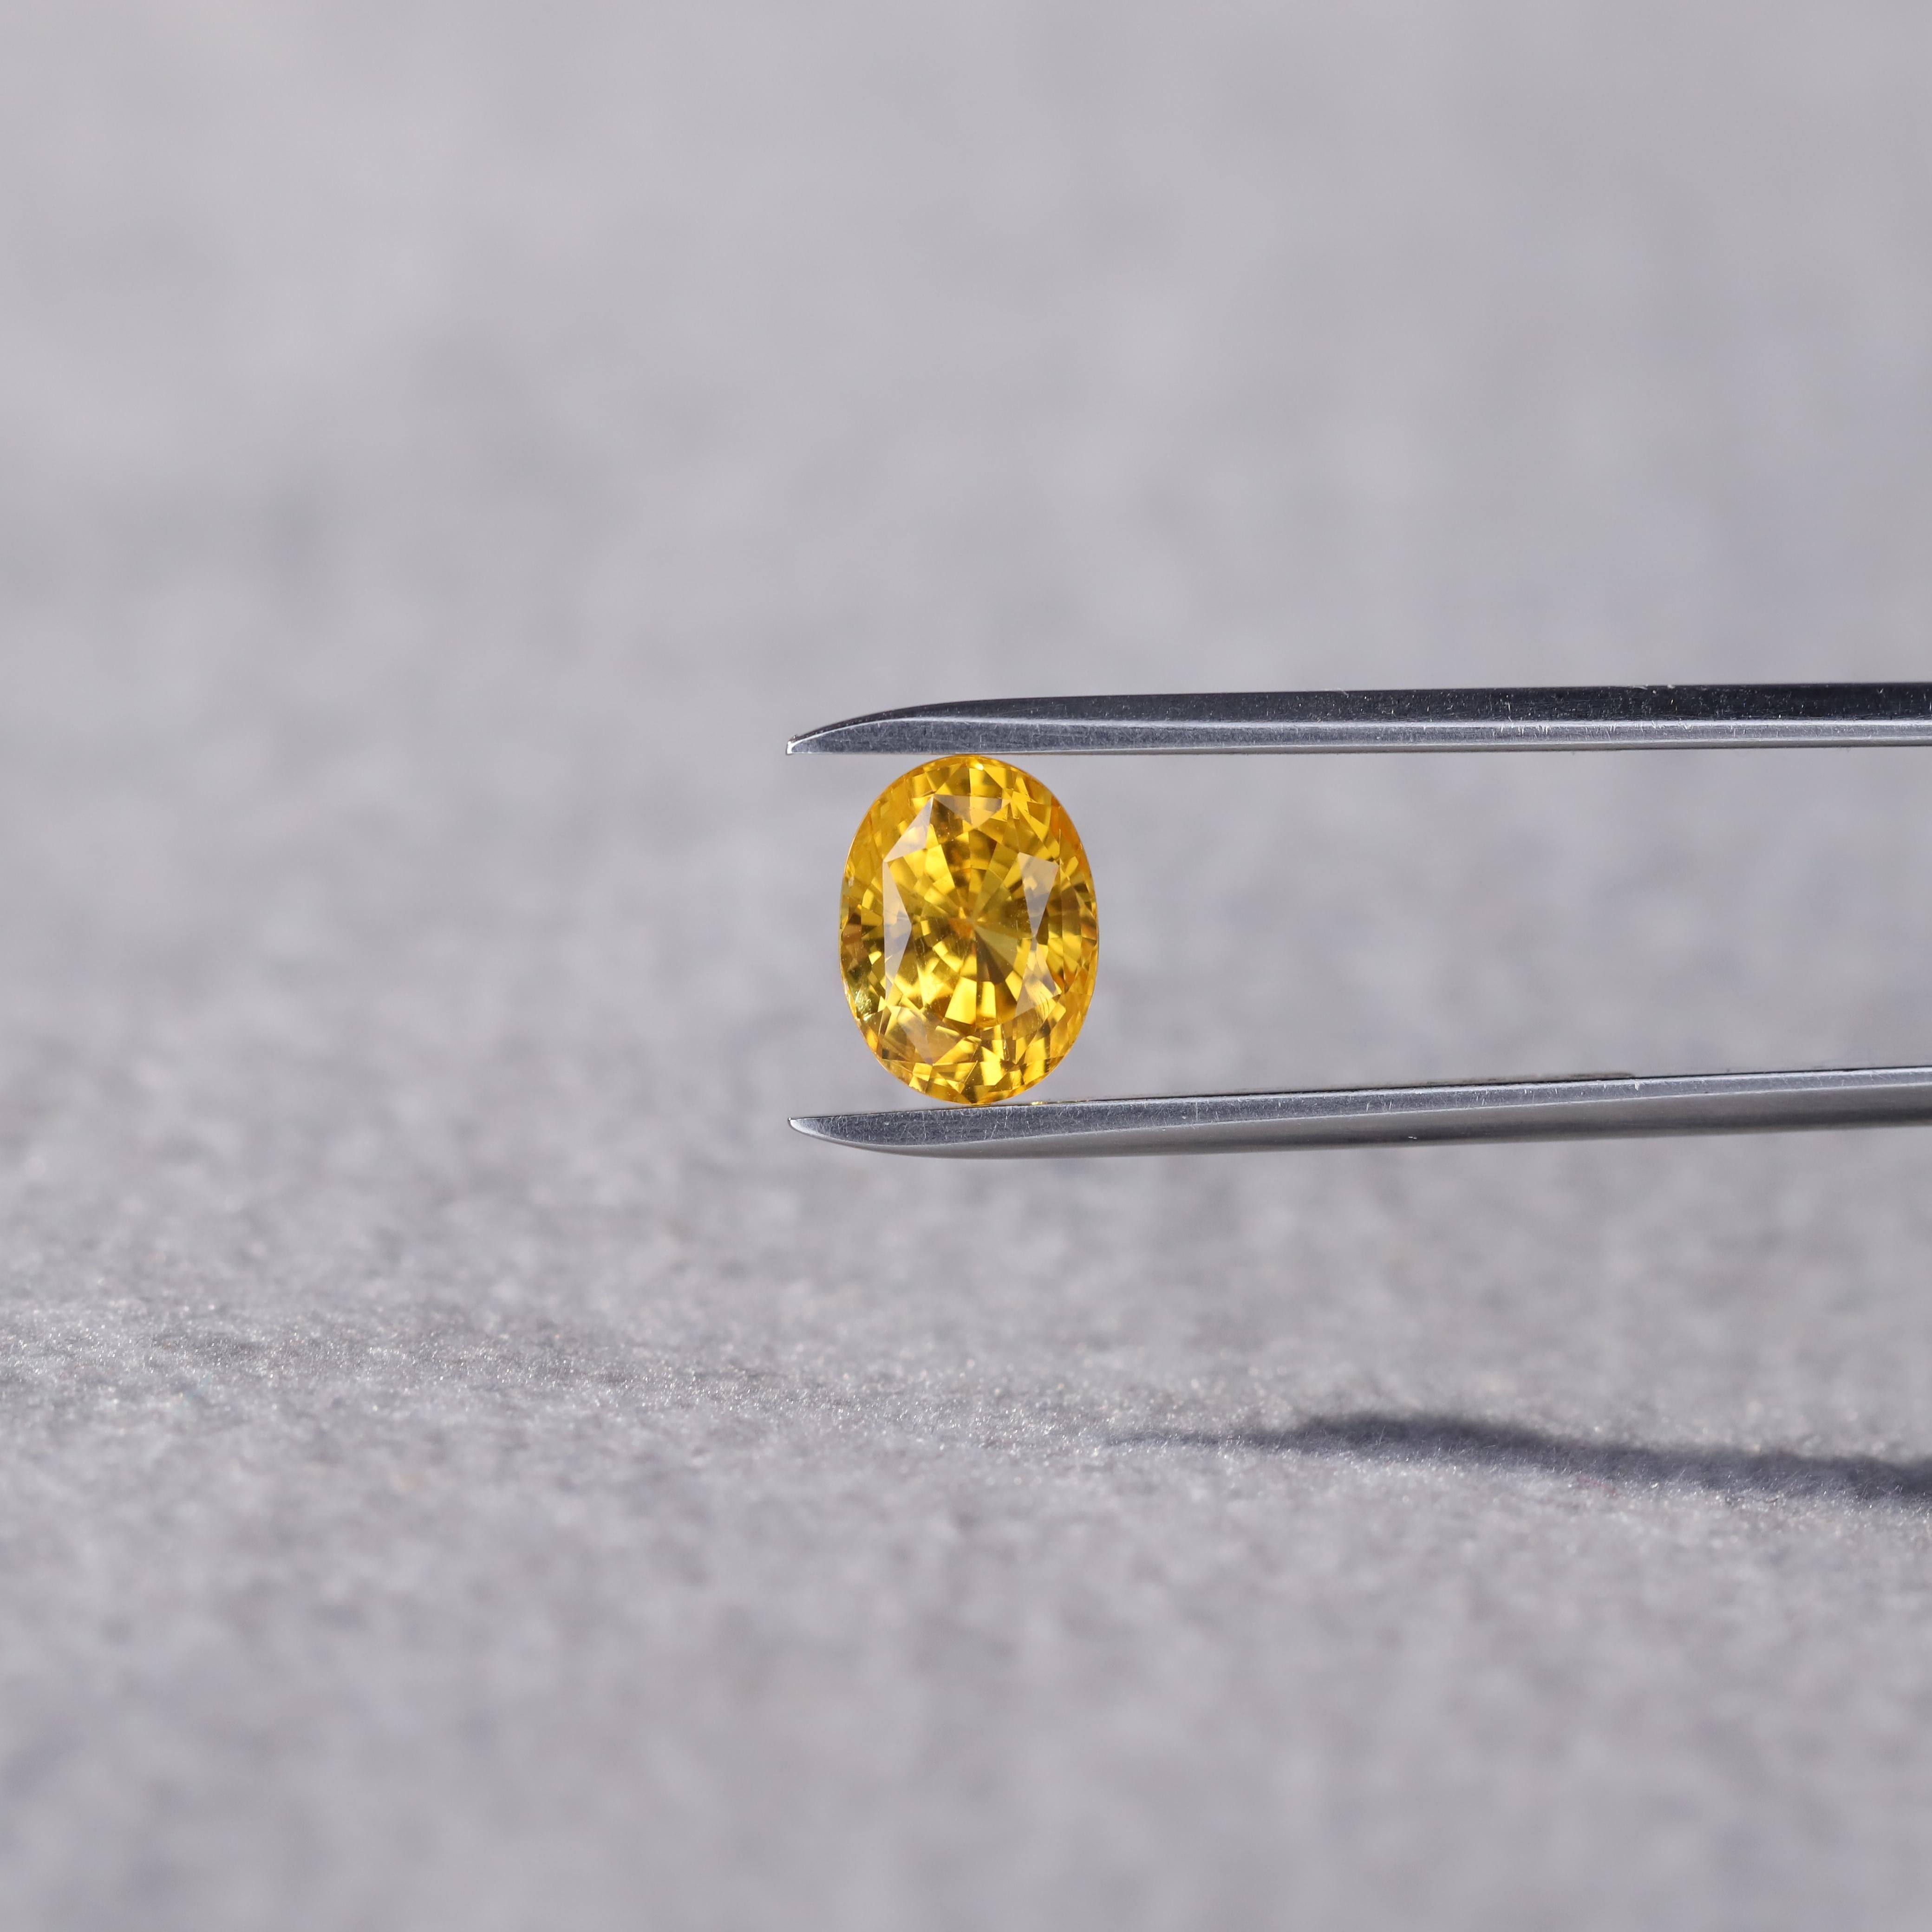 Women's 2.25 Carat Oval Cut Natural Golden Yellow Sapphire Loose Gemstone from Sri Lanka For Sale